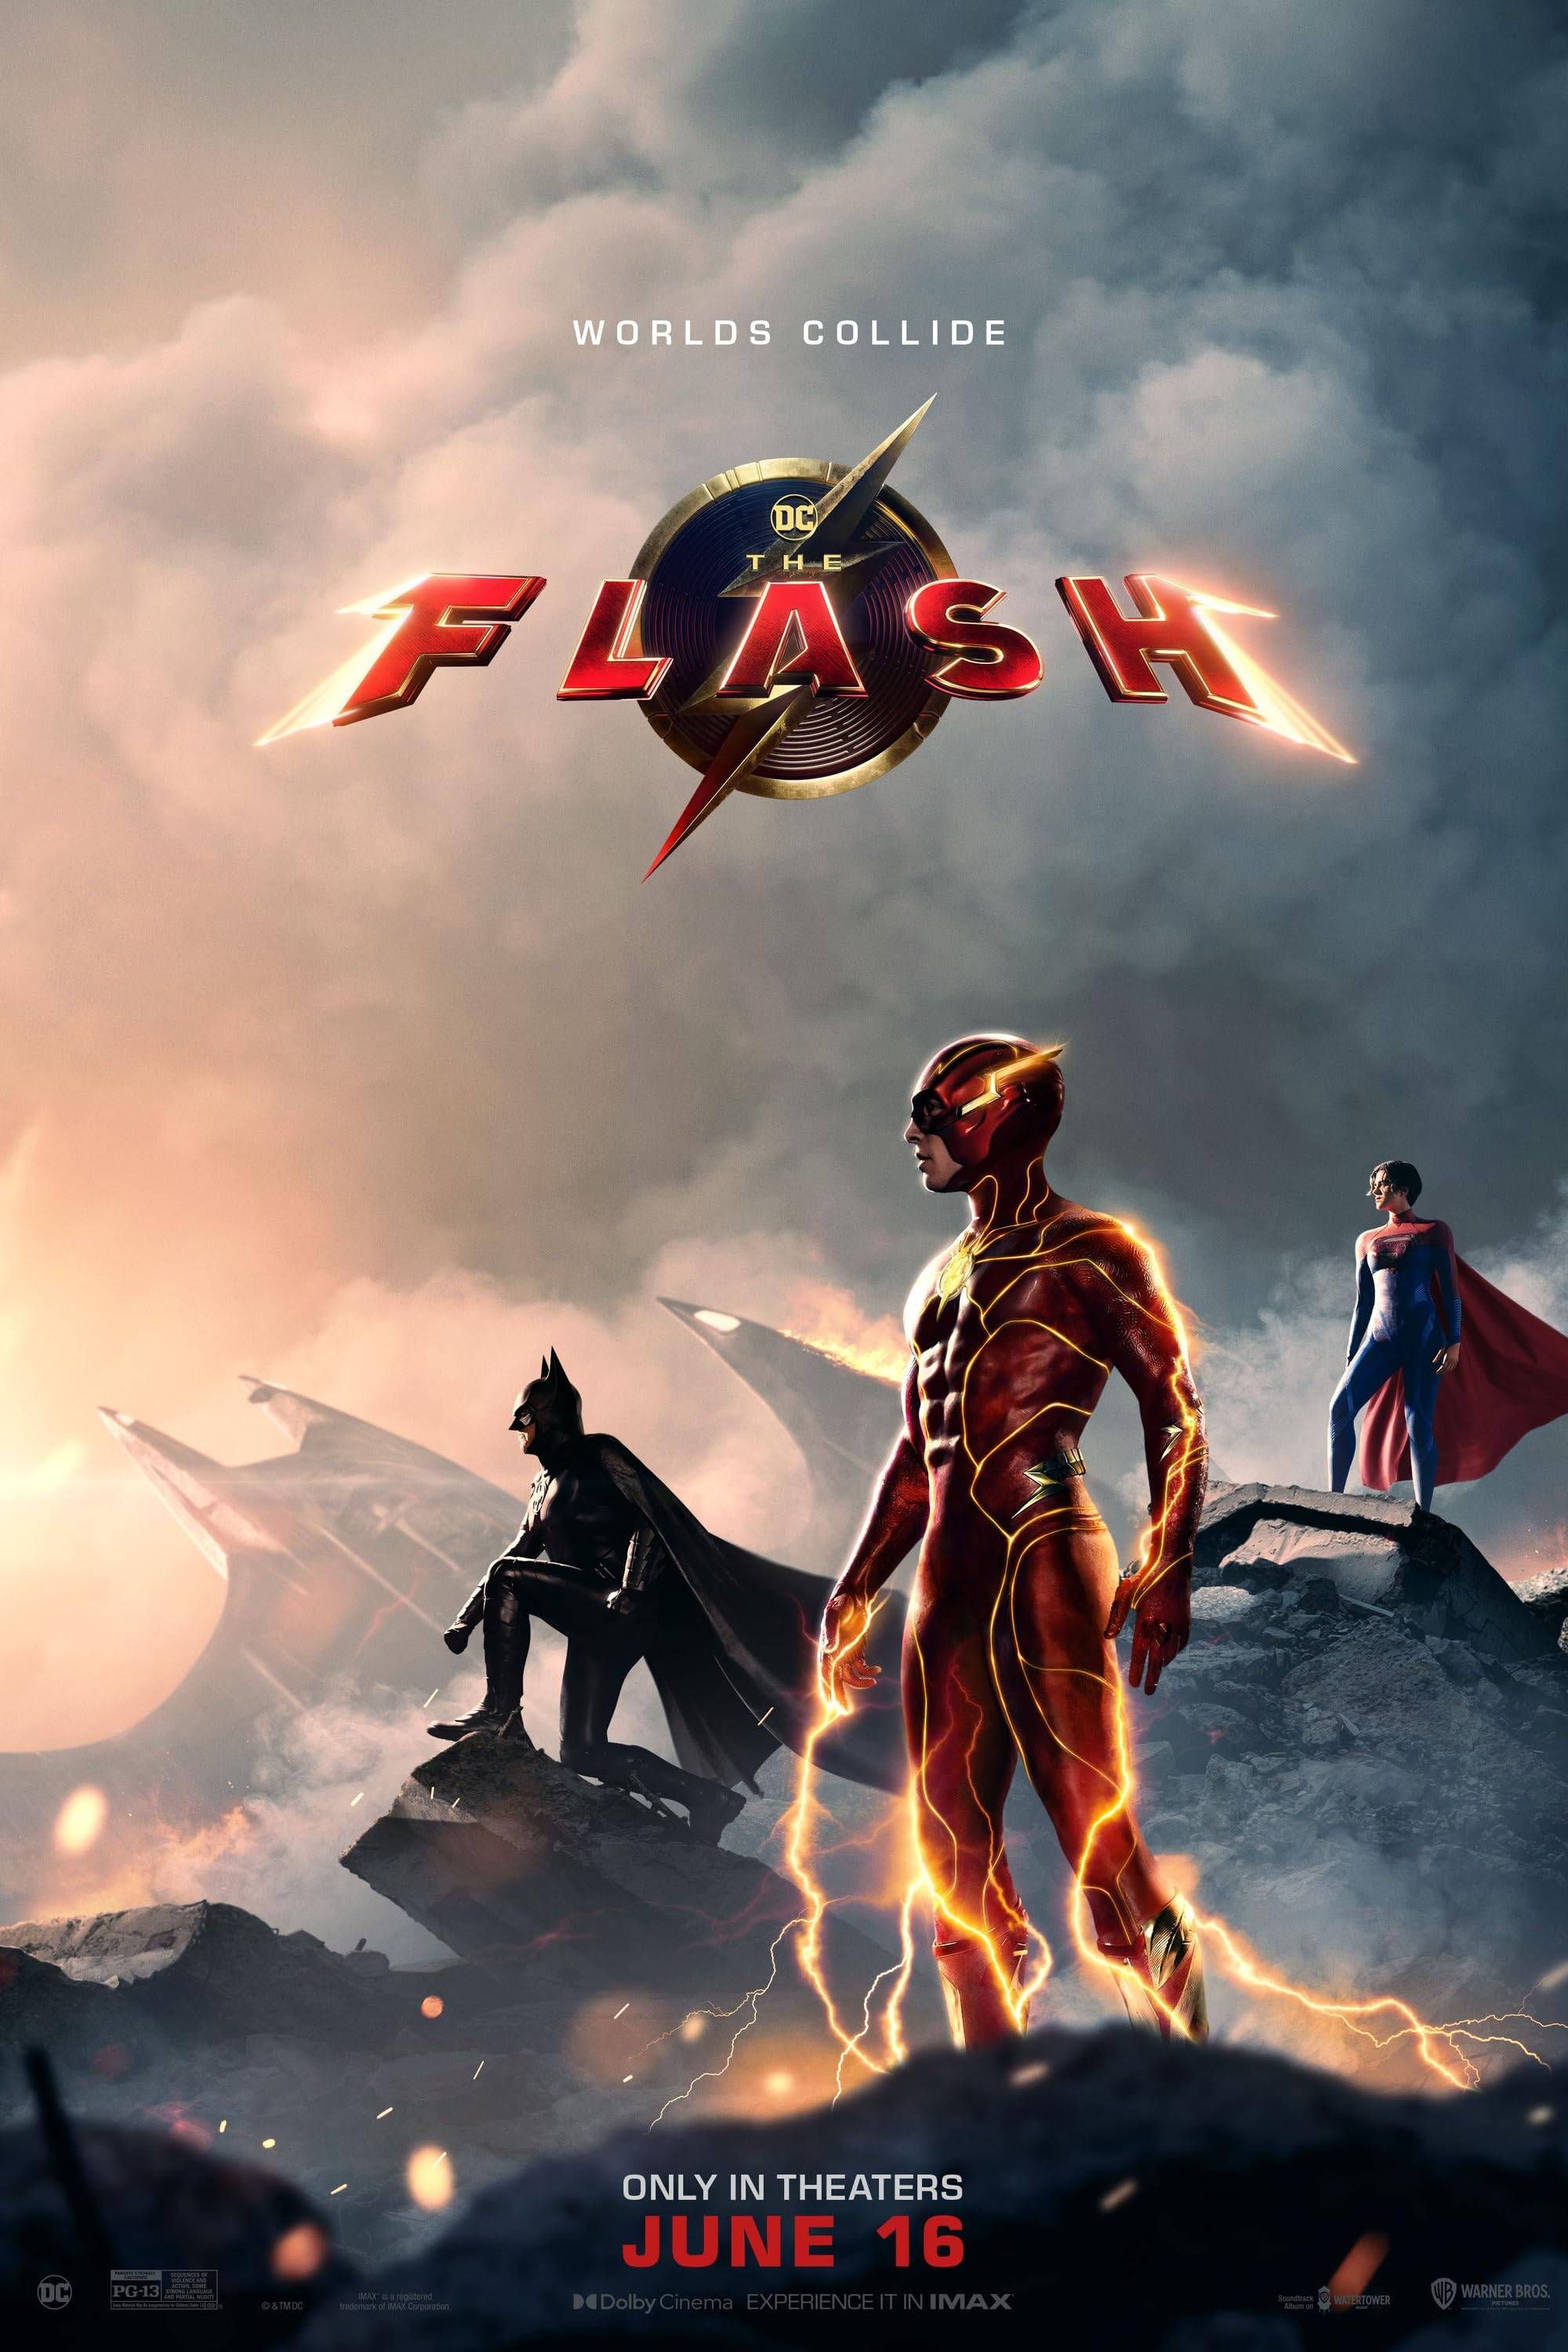 The Flash Theatrical Poster